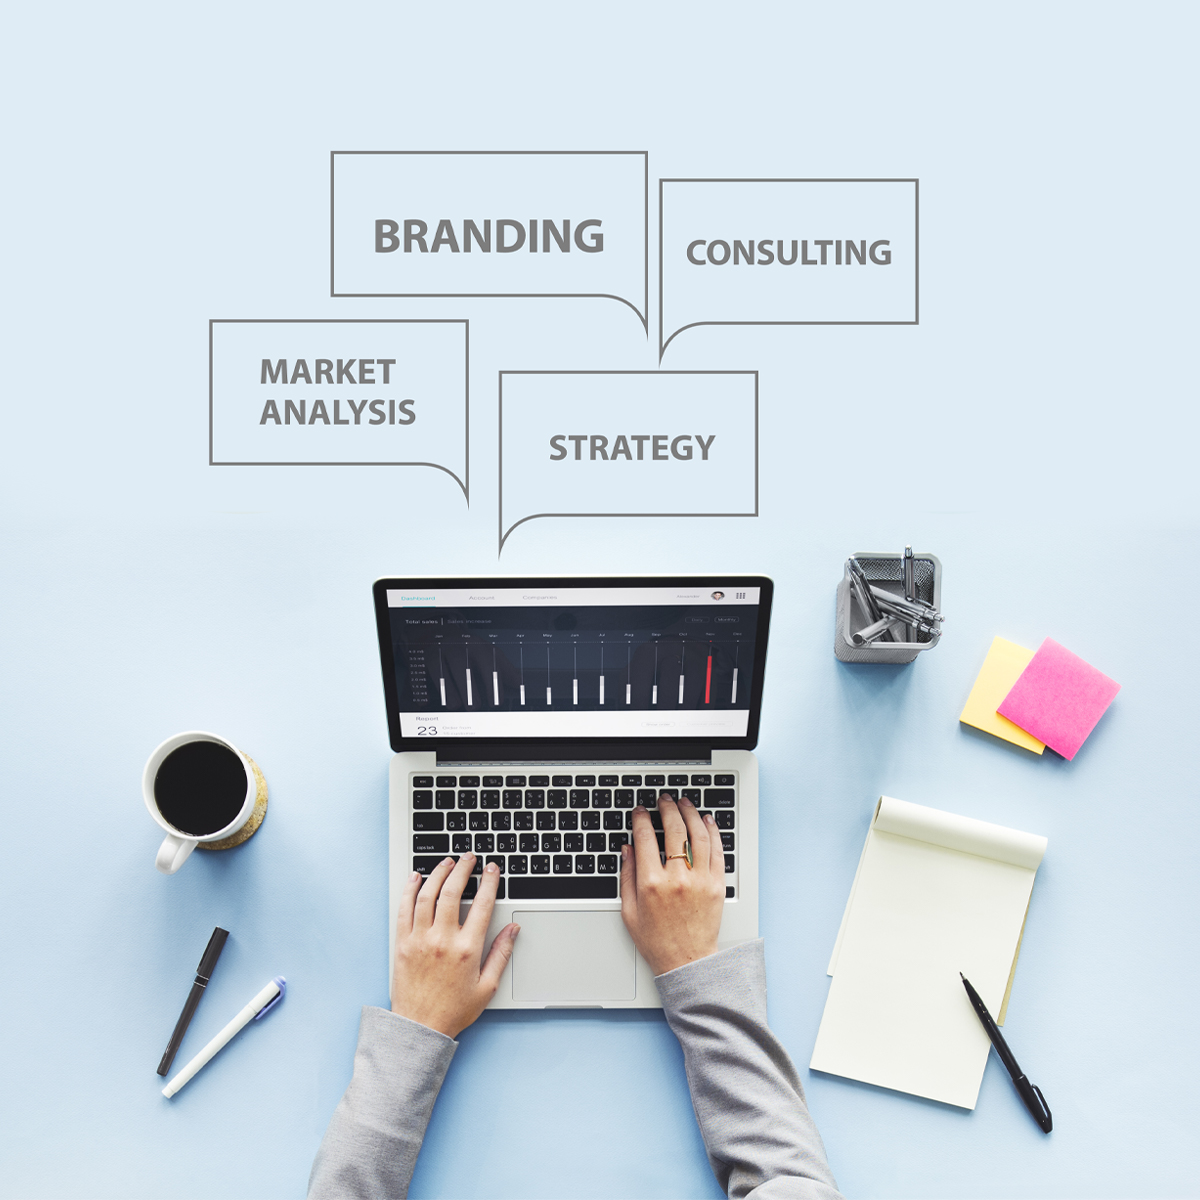 Marketing and brand strategy